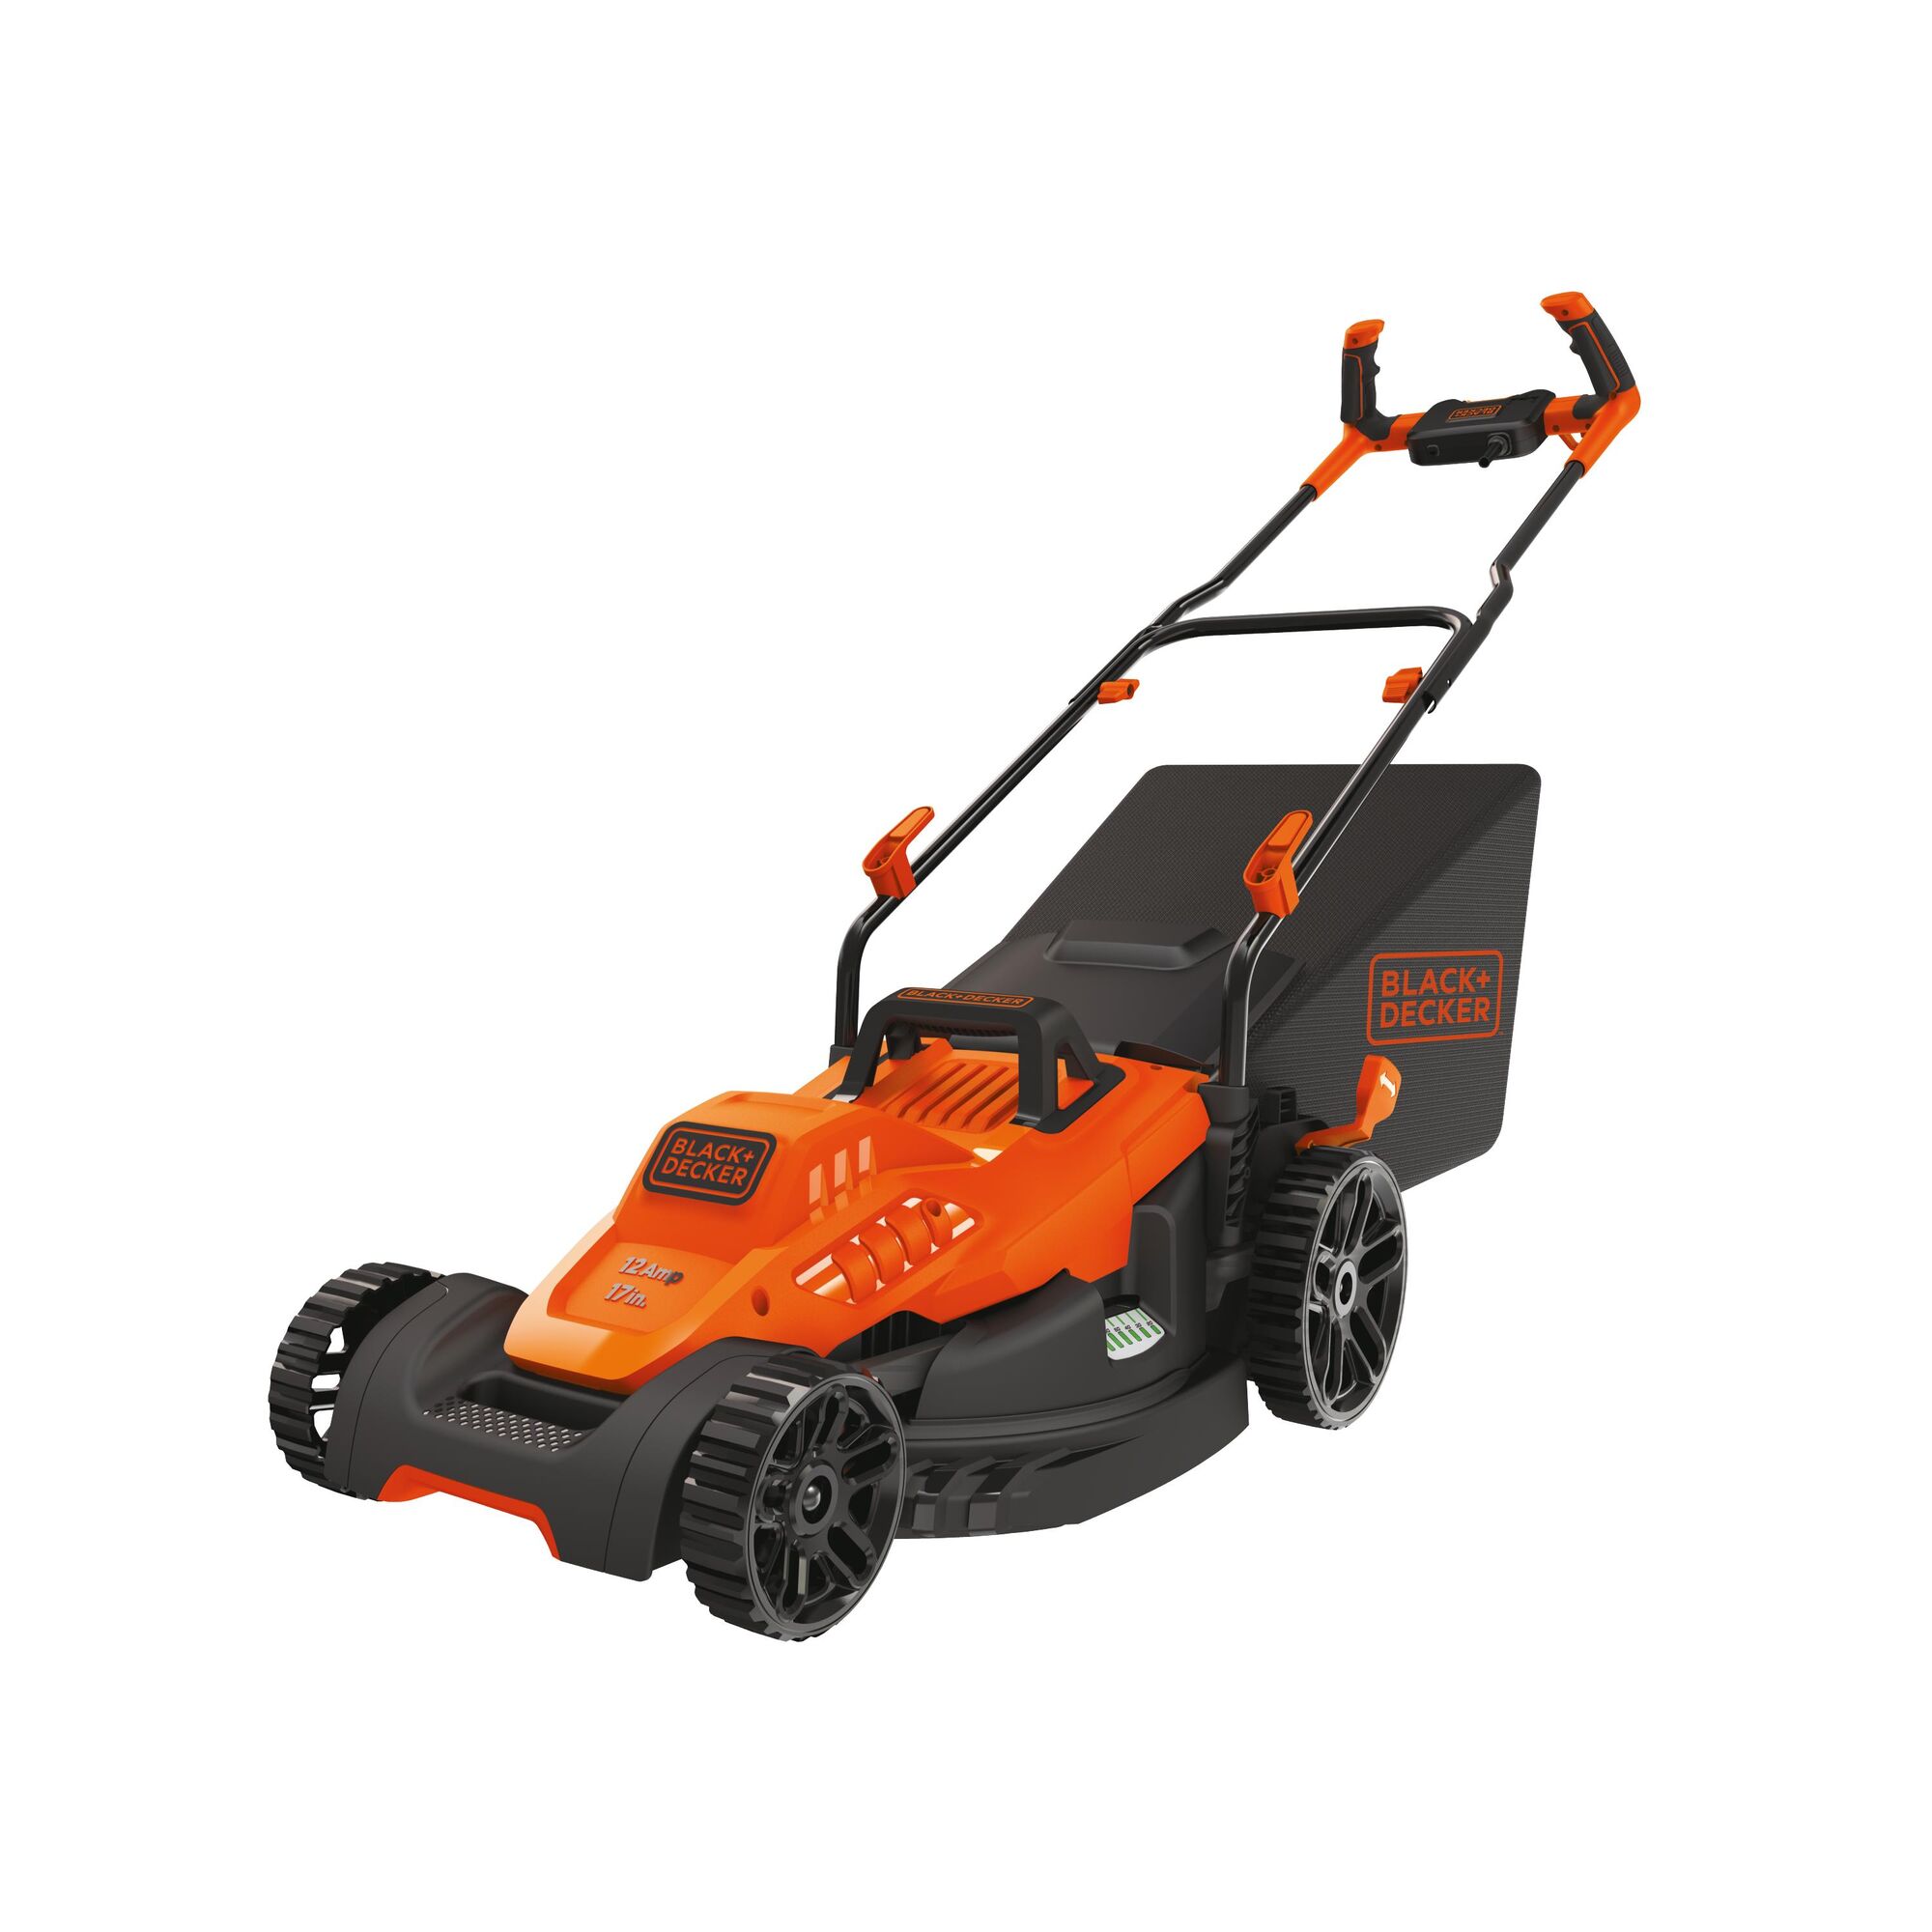 12 Amp 17 inch electric lawn mower with comfort grip handle.